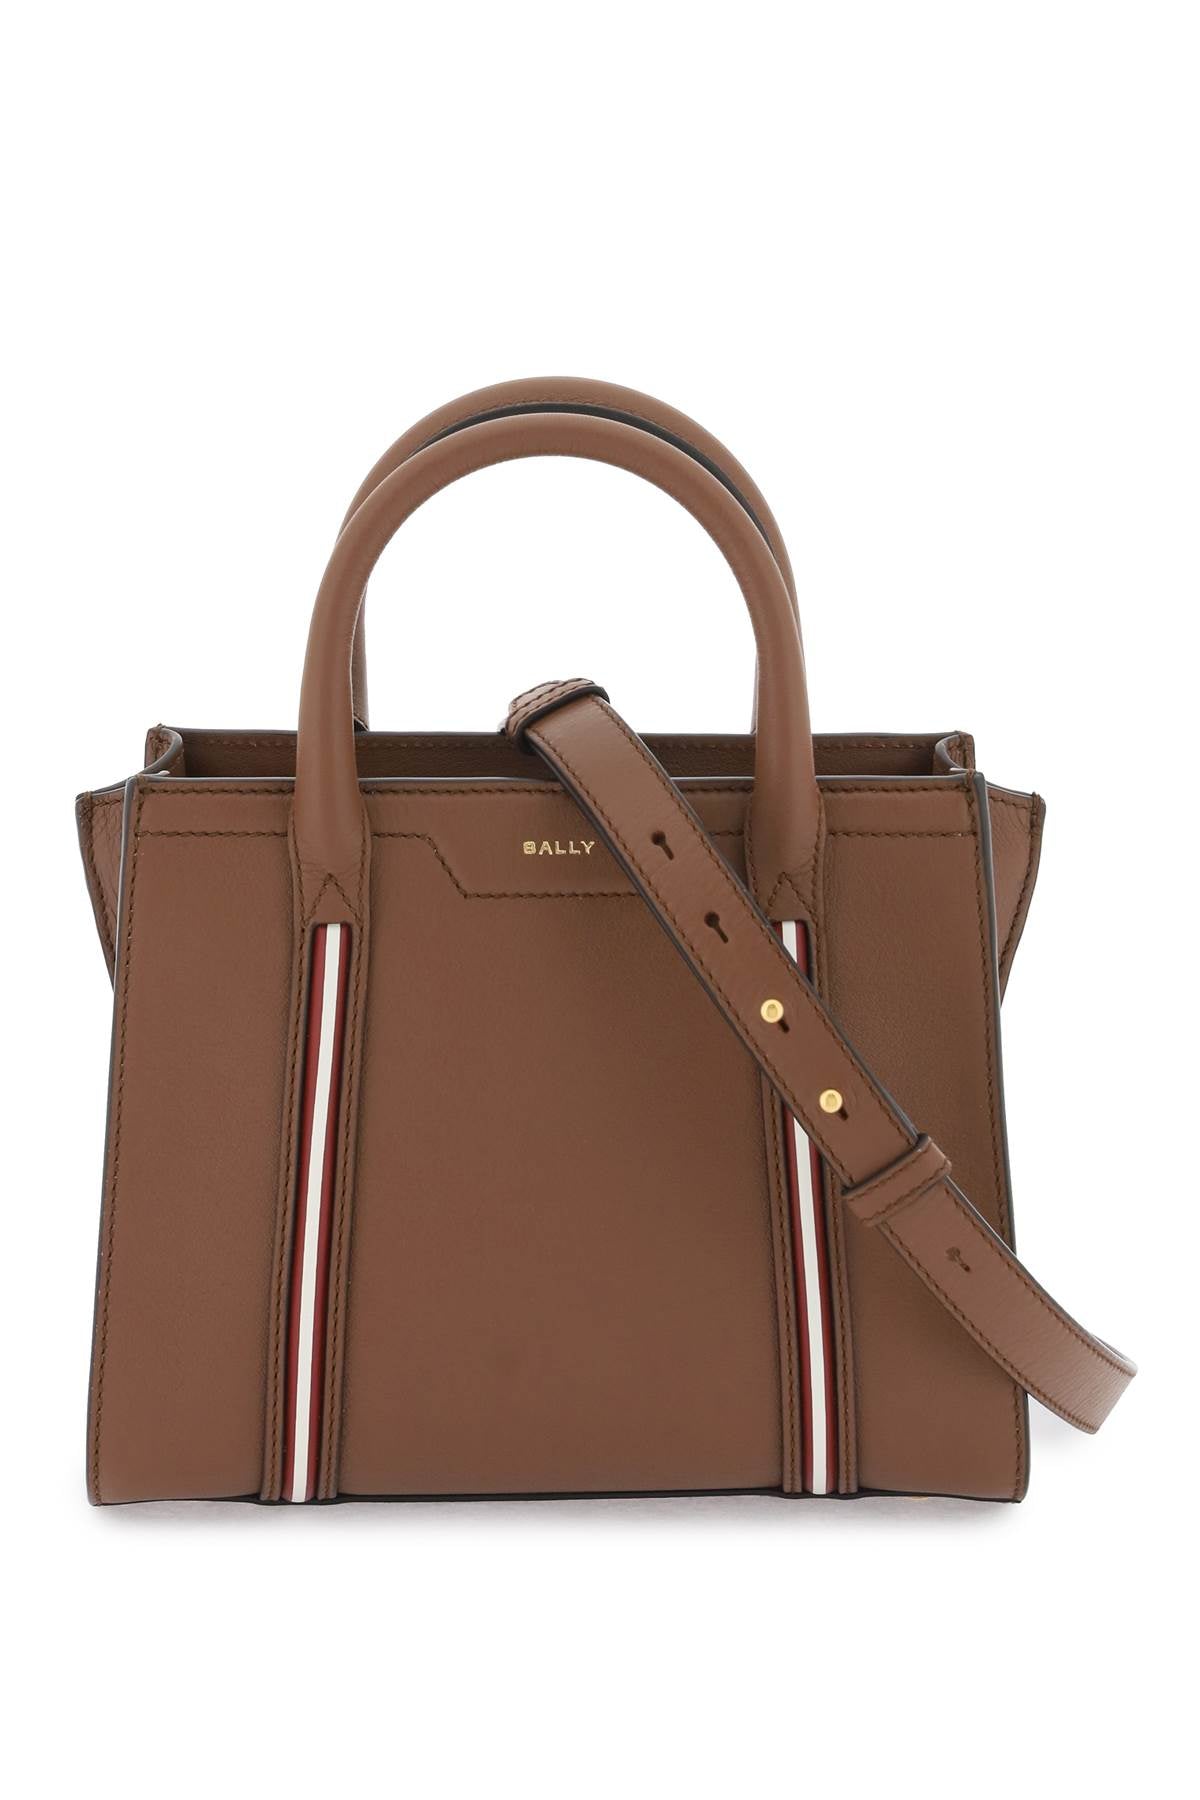 BALLY Small Code Tote in Hammered Leather with Iconic Stripe and Gold Accents